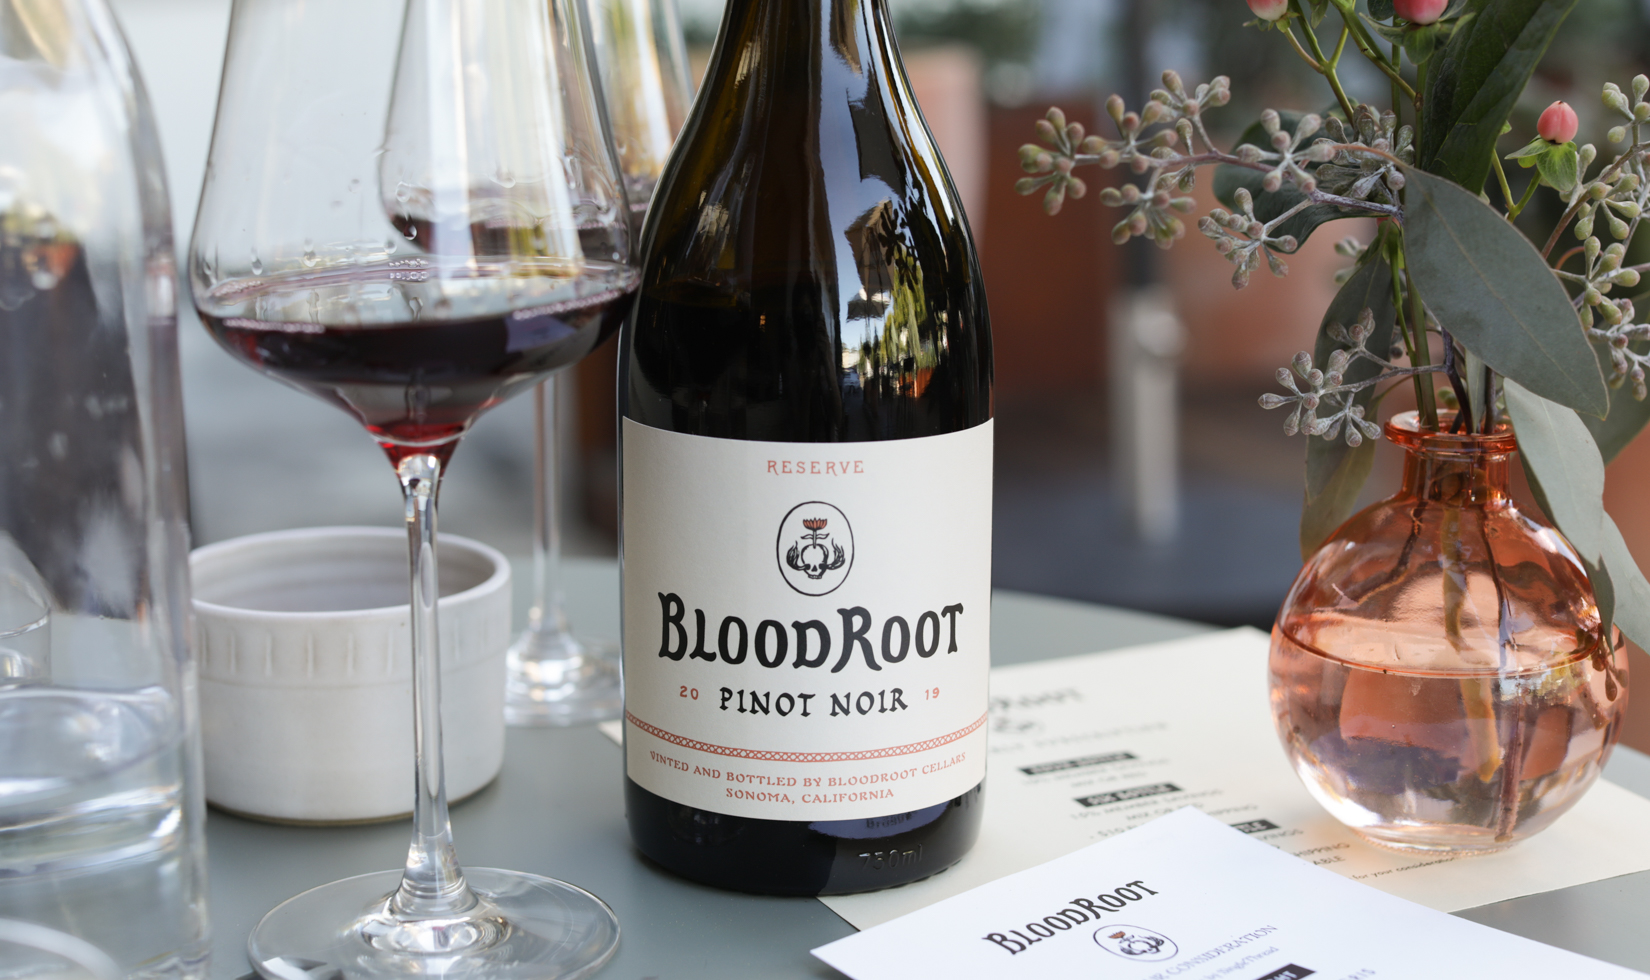 bloodroot pinot noir wine bottle with glass of wine on a table